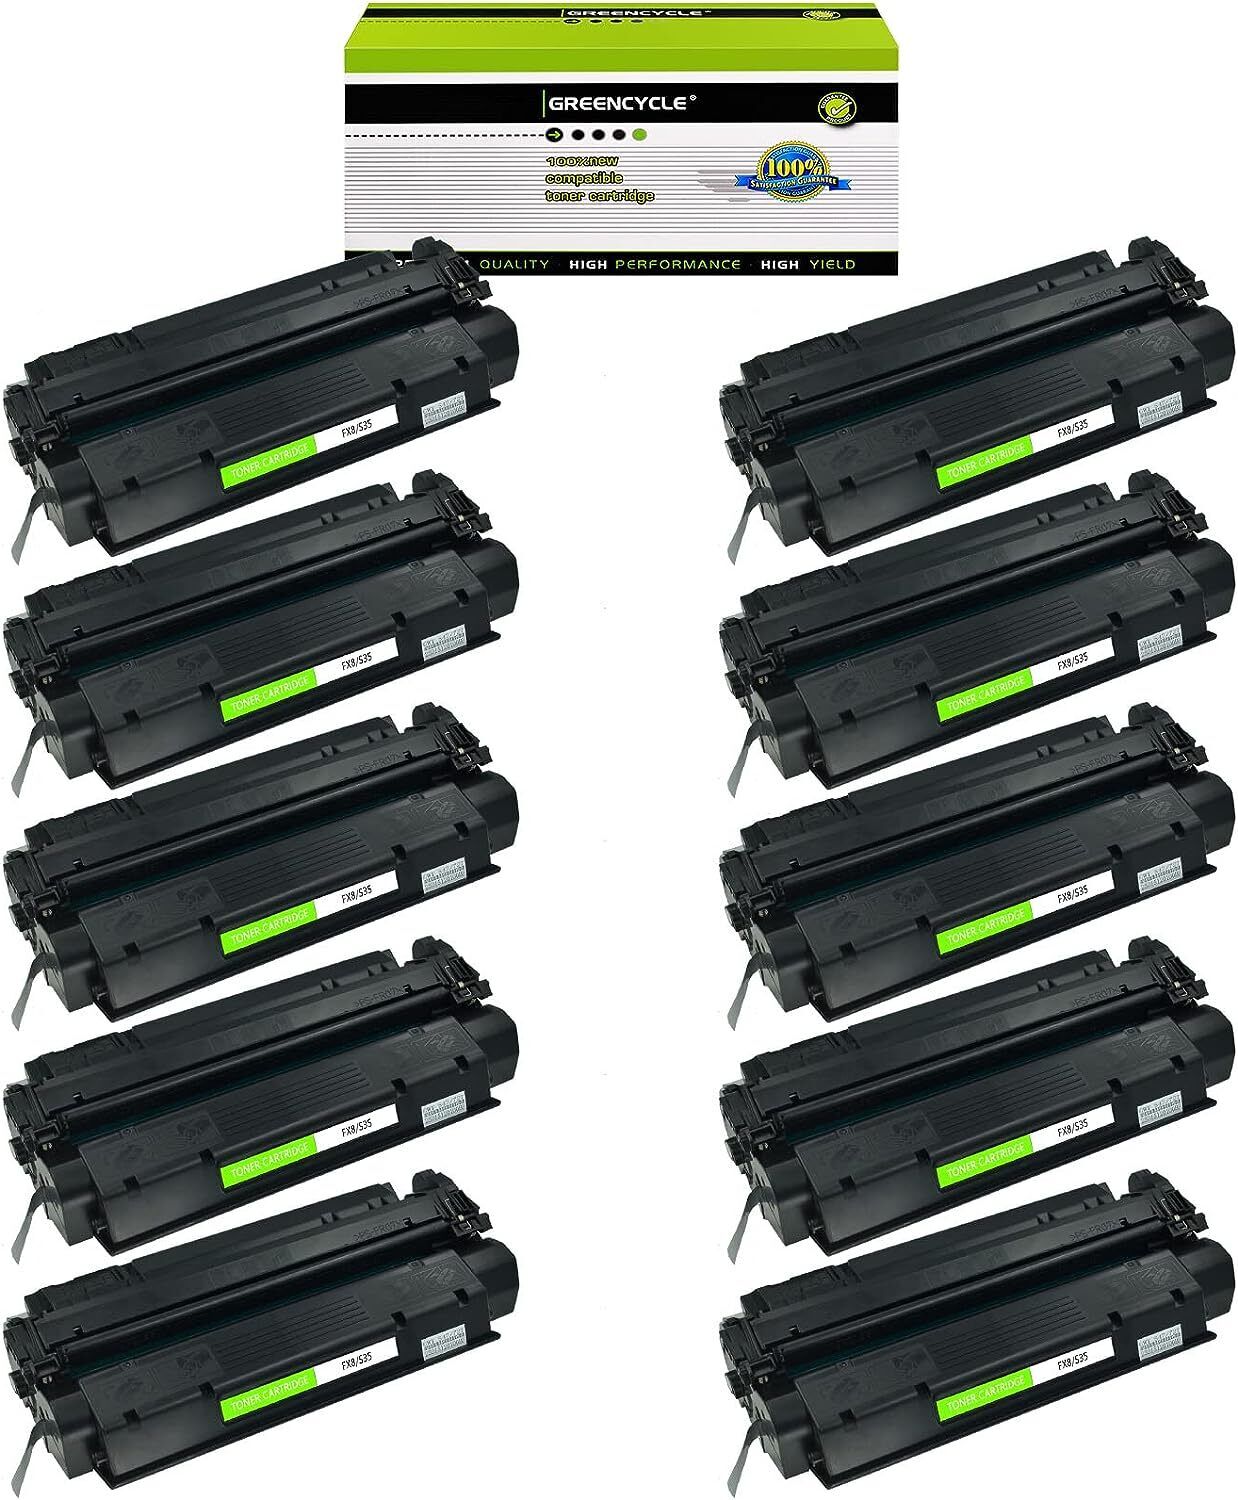 10PK greencycle Compatible for Canon FX8 S35 FAXPHONE L170 L400 ImageClass D320